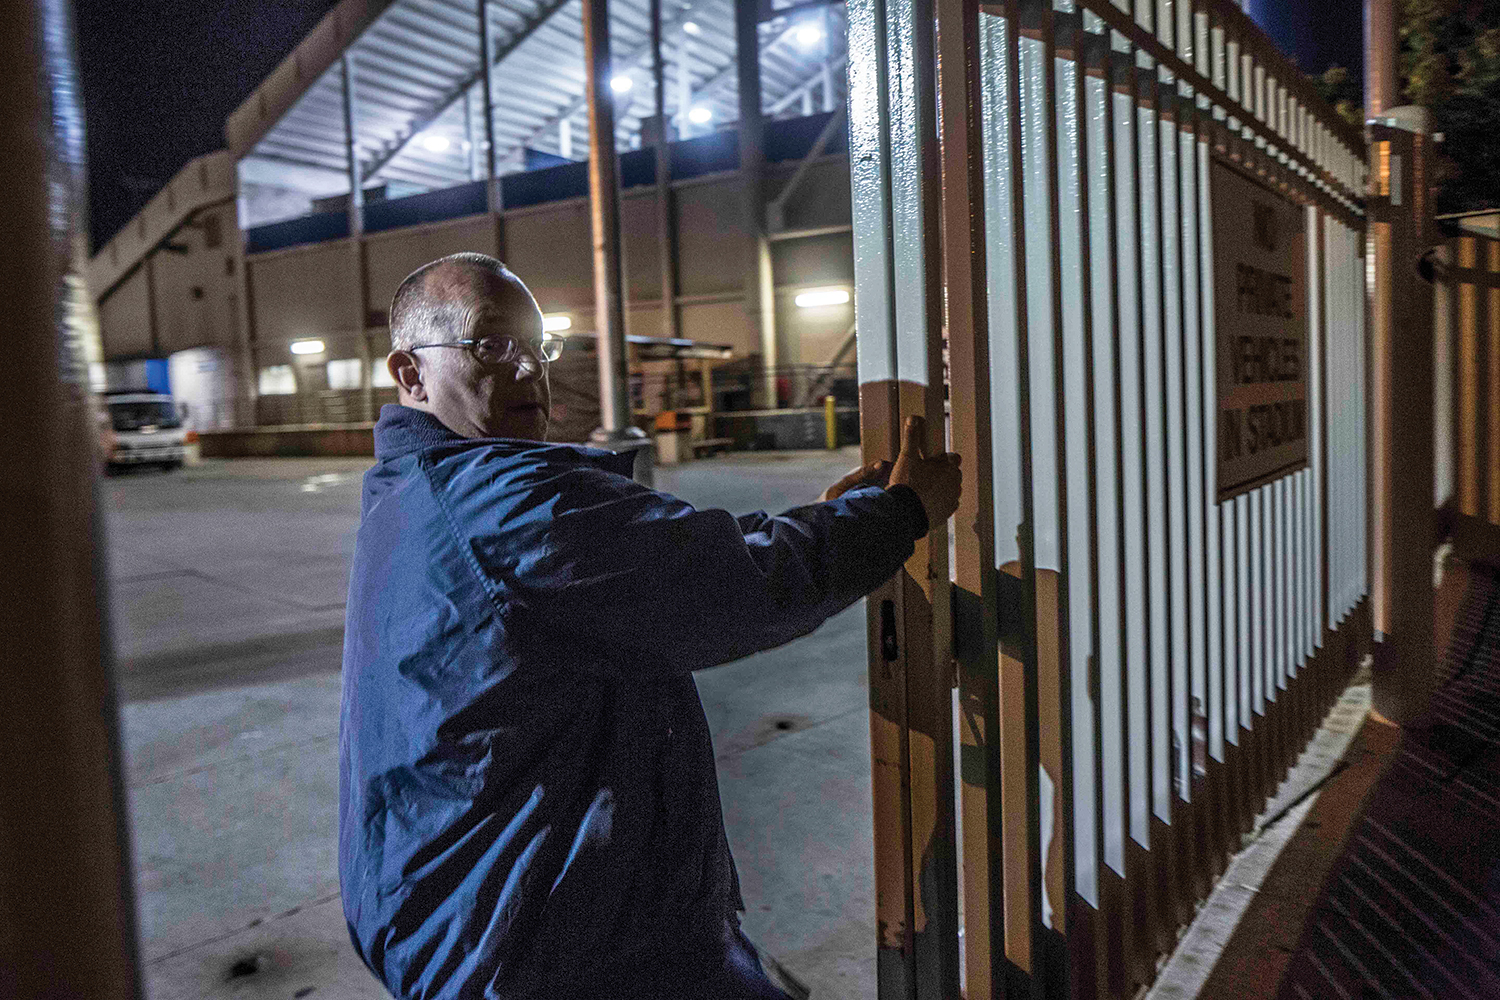 An event supervisor shuts the gates to BYU's LaVell Edwards Stadium at 3:24 a.m., the last man out after a long day.